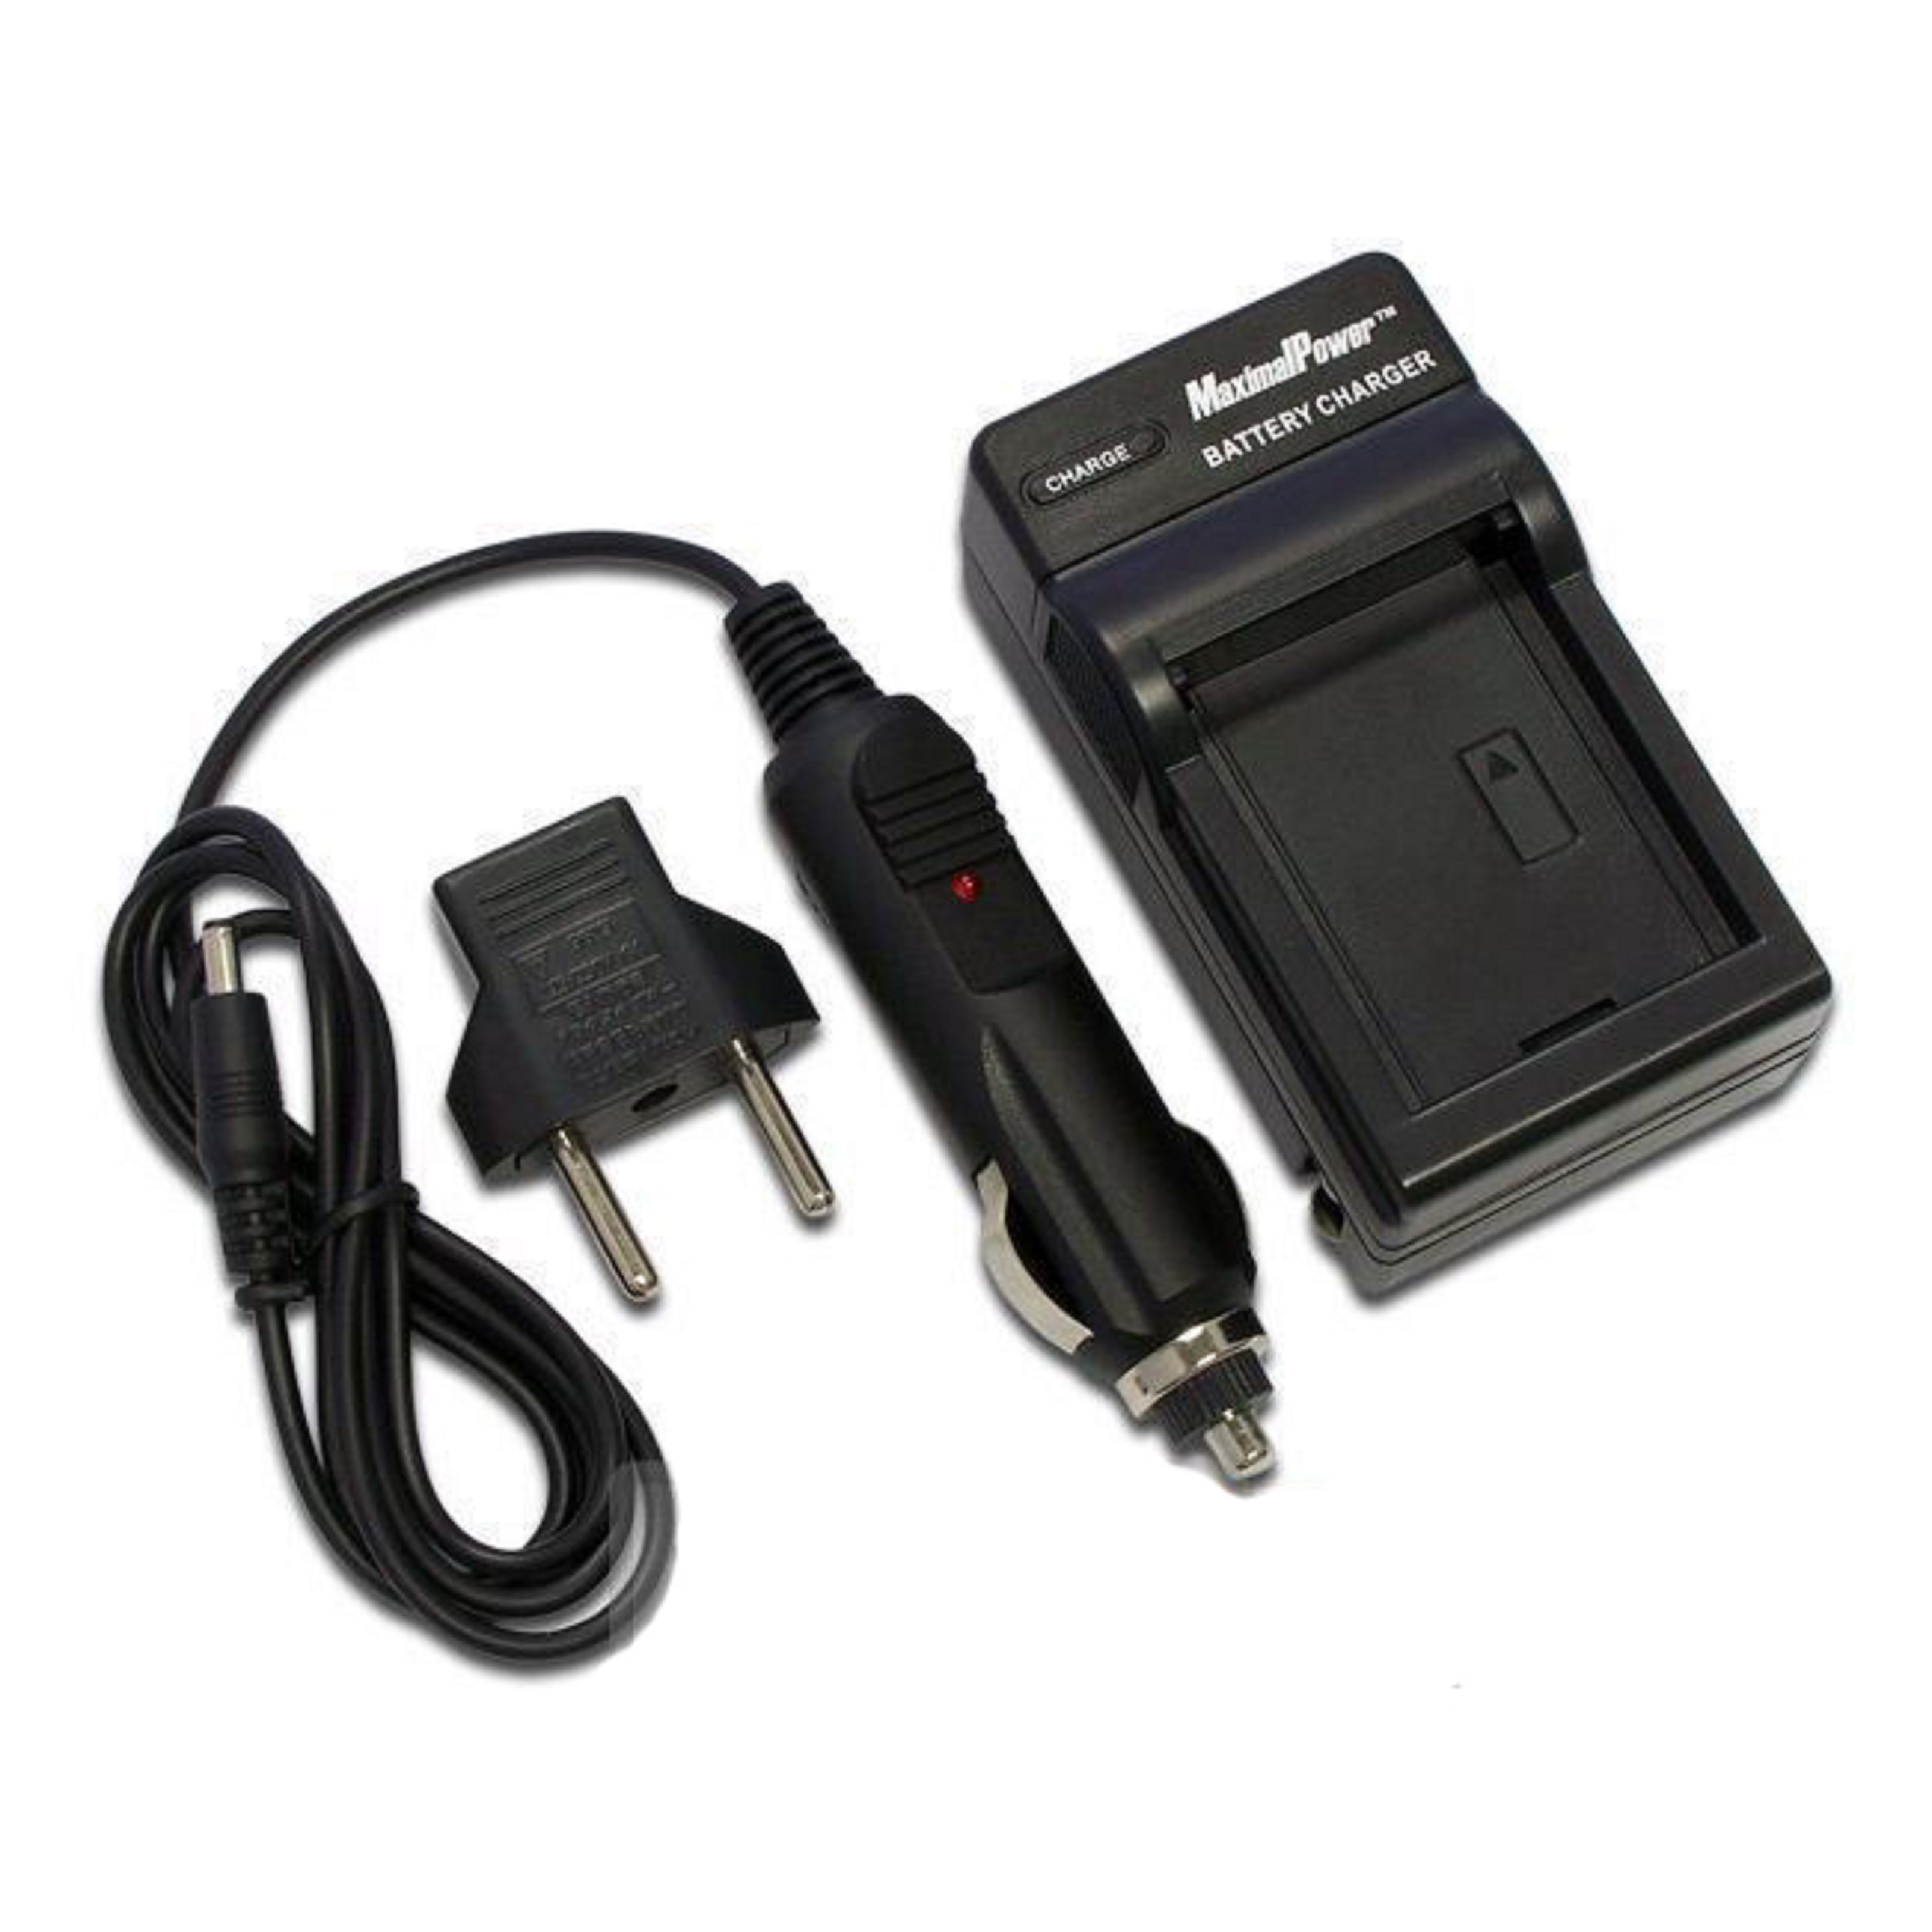 Replacement Charger for Sony Cybershot Camera Sony Cybershot DSC-W130/B Battery Charger